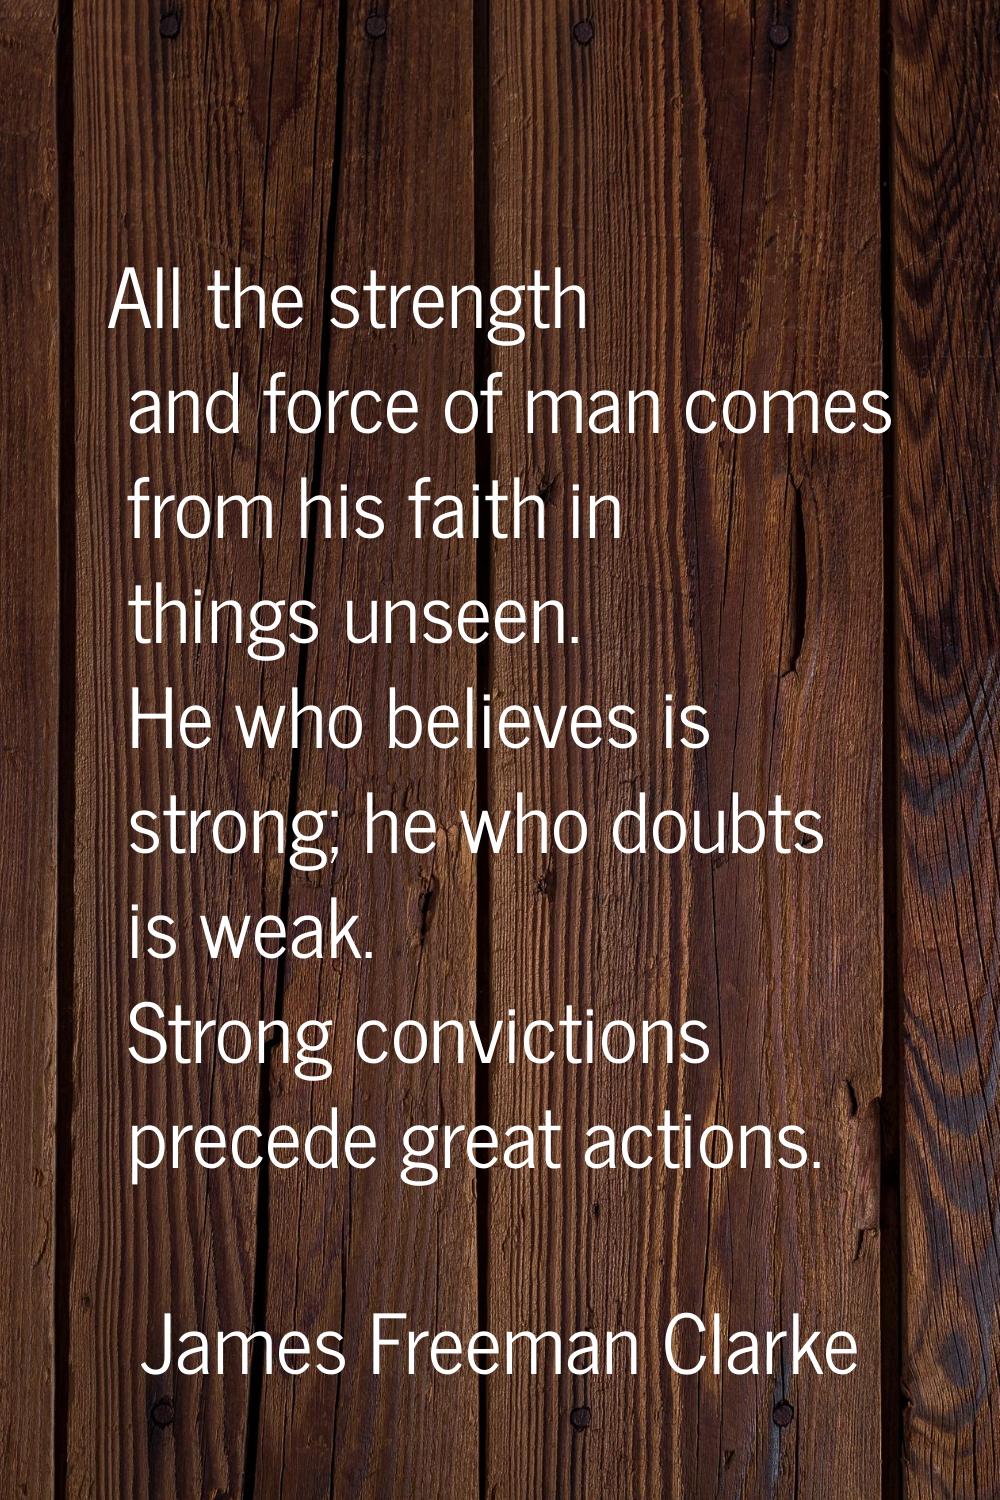 All the strength and force of man comes from his faith in things unseen. He who believes is strong;